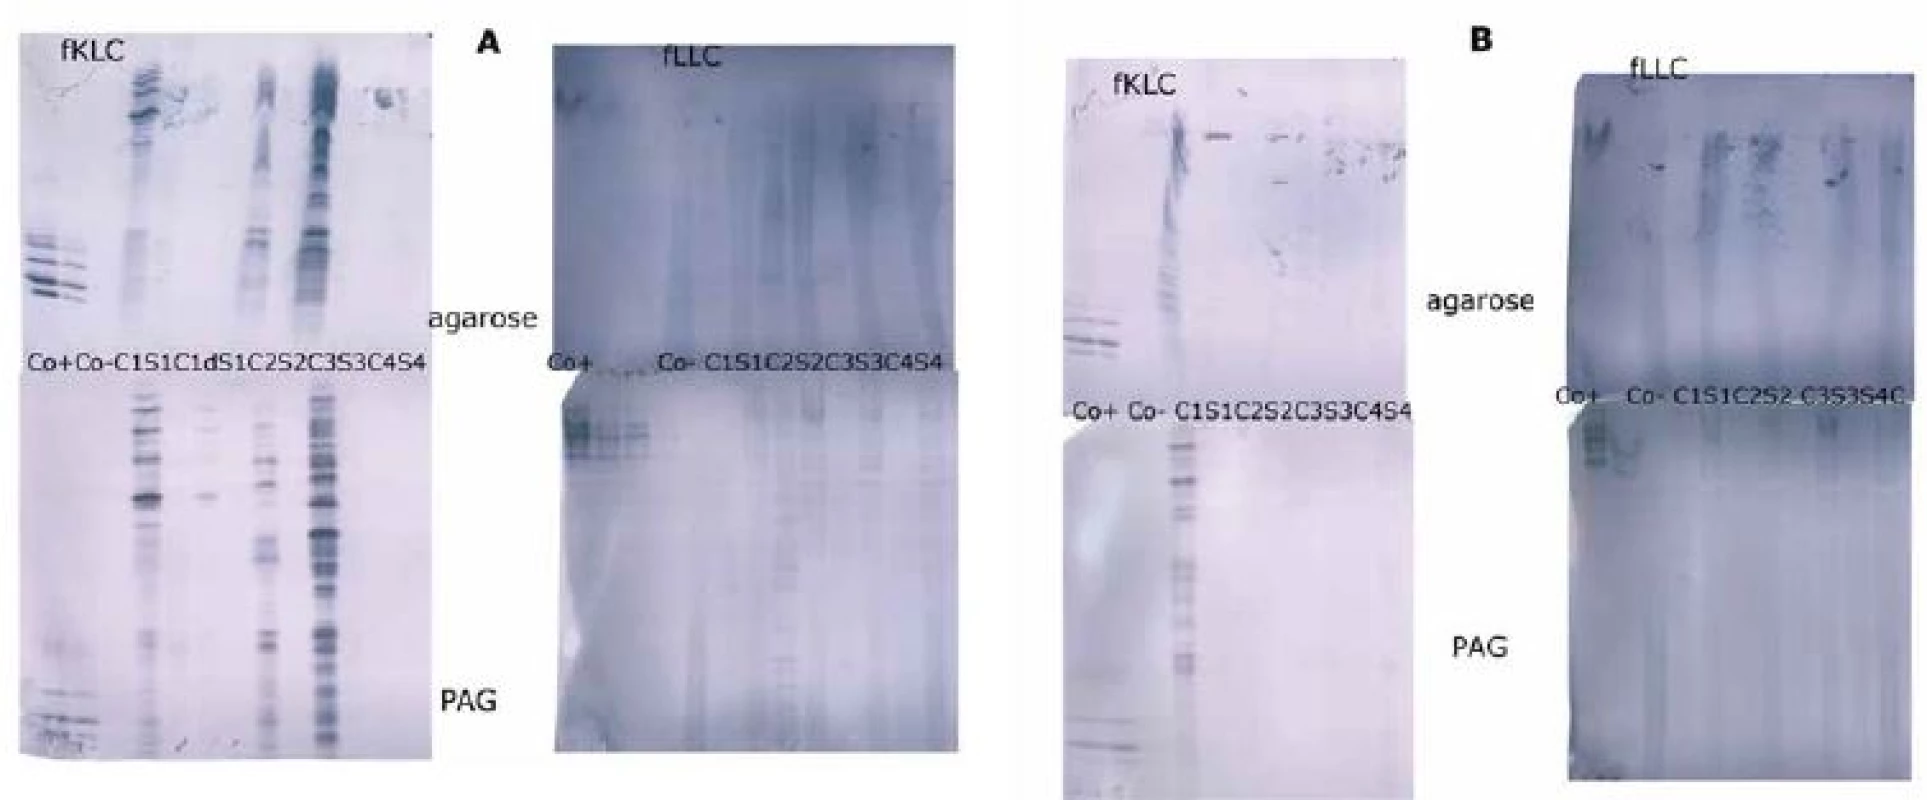 Oligoclonal free light chains.
A) Concordant results between agarose and PAG IEF/AIB. C1, C2 and C3 are clearly positive for oligoclonal fKLC while only C2 is clearly positive for oligoclonal fLLC. In C1 sample, two faint cerebrospinal fl uid-restricted fLLC bands were found on the membrane after PAG IEF/AIB, while the evaluation was discrepant for agarose IEF/IF (two bands by observer A, one band by observer B). Sample C4 is negative.
AIB – affinity immunoblotting; C1–4 – paired undiluted cerebrospinal fl uid samples; C1d – cerebrospinal fl uid 1 diluted 1/10 (for fKLC only); Co+ – positive control (monoclonal free light chains [Bio-Rad – AbD Serotec, Prague, Czech Republic] diluted to 0.25 and 0.10 mg/l for fKLC and 1.0, 0.5, 0.25 and 0.10 mg/l for fLLC); Co– – negative control (intravenous immunoglobulin G remedy at a concentration of 250 mg/lIgG); fKLC – free kappa light chains; fLLC – free lambda light chains; IEF – isoelectric focusing; IF – immunofi xation; PAG – polyacrylamide gel; S1–4 – paired serum samples diluted 1/80 (except for S1 next to neat C1 that was diluted 1/20 for fKLC analysis)
(B) Example of a discordant result of fLLC between agarose and PAG IEF/AIB. There are numerous fKLC bands in sample C1, whereas faint fLLC bands were only found on PAG IEF/AIB (two bands by observer A, three bands by observer B). Co+ is diluted to 0.25 and 0.10 mg/L for fKLC and 1.0 and 0.25 mg/L for fLLC. AIB – affinity immunoblotting; fKLC – free kappa light chains; fLLC – free lambda light chains; IEF – isoelectric focusing; PAG – polyacrylamide gel